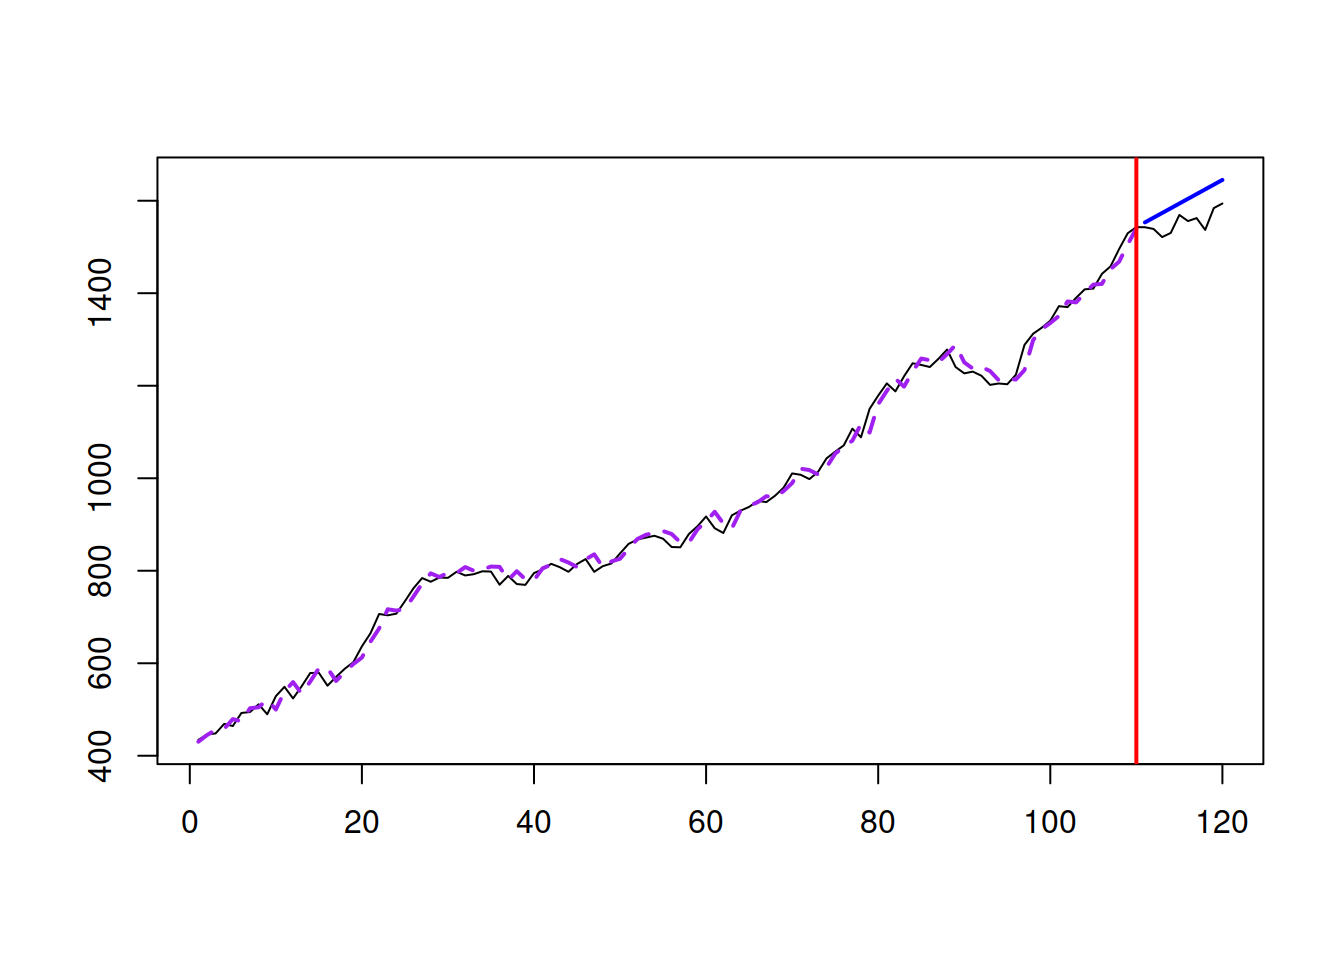 Random Walk with drift data and the model applied to that data.